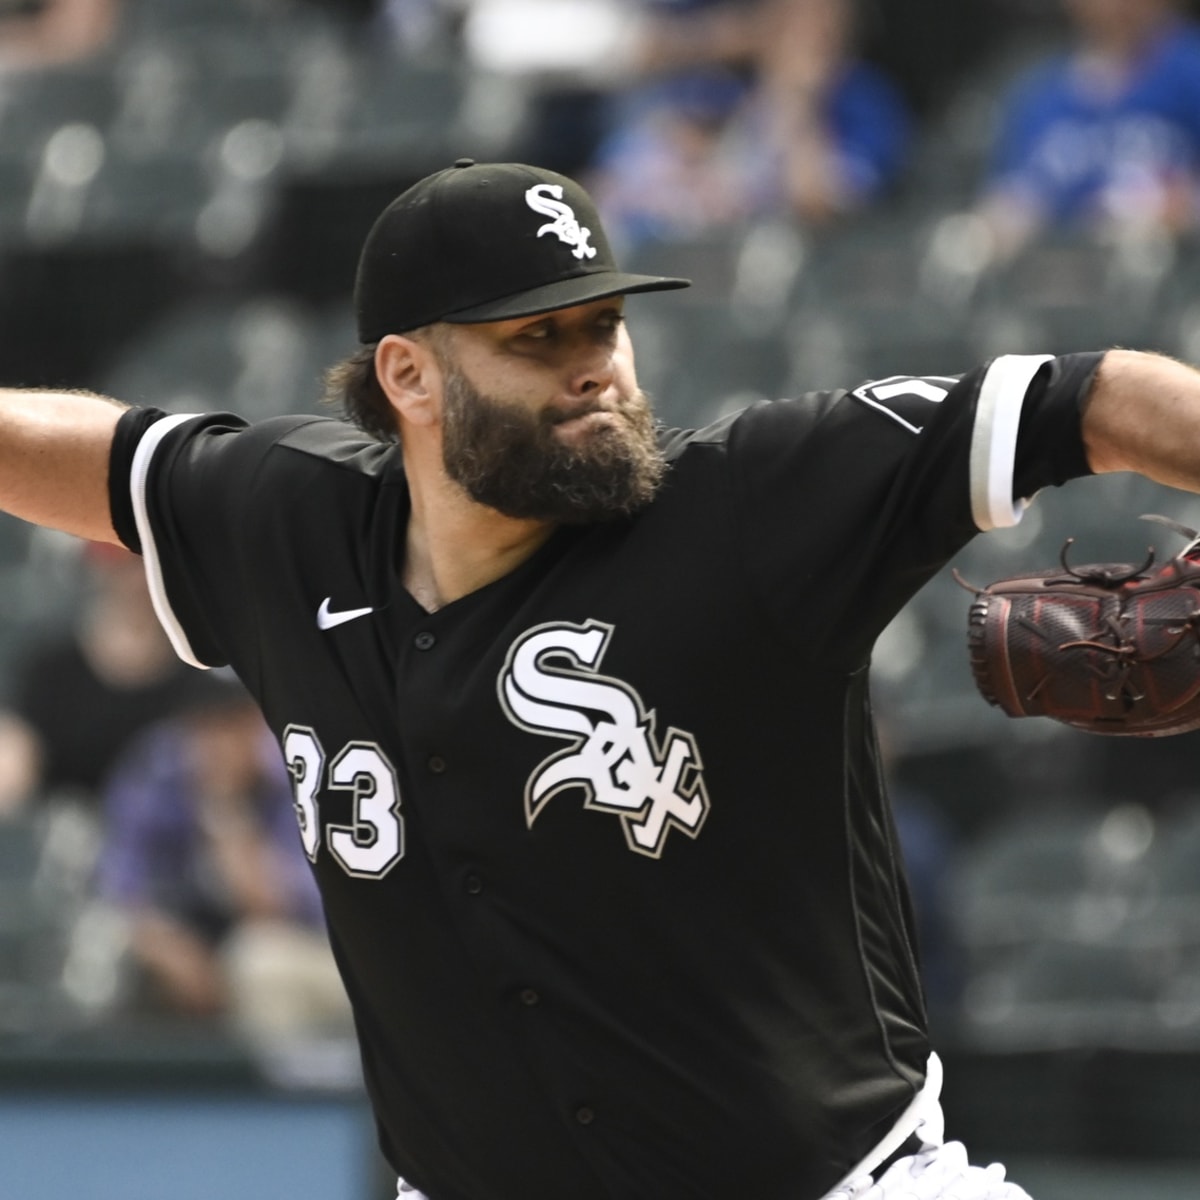 straf hav det sjovt pedicab MLB Insider Suggests Two Key White Sox Players Will Be Dealt, Says  Cincinnati Reds Have Checked In - Fastball